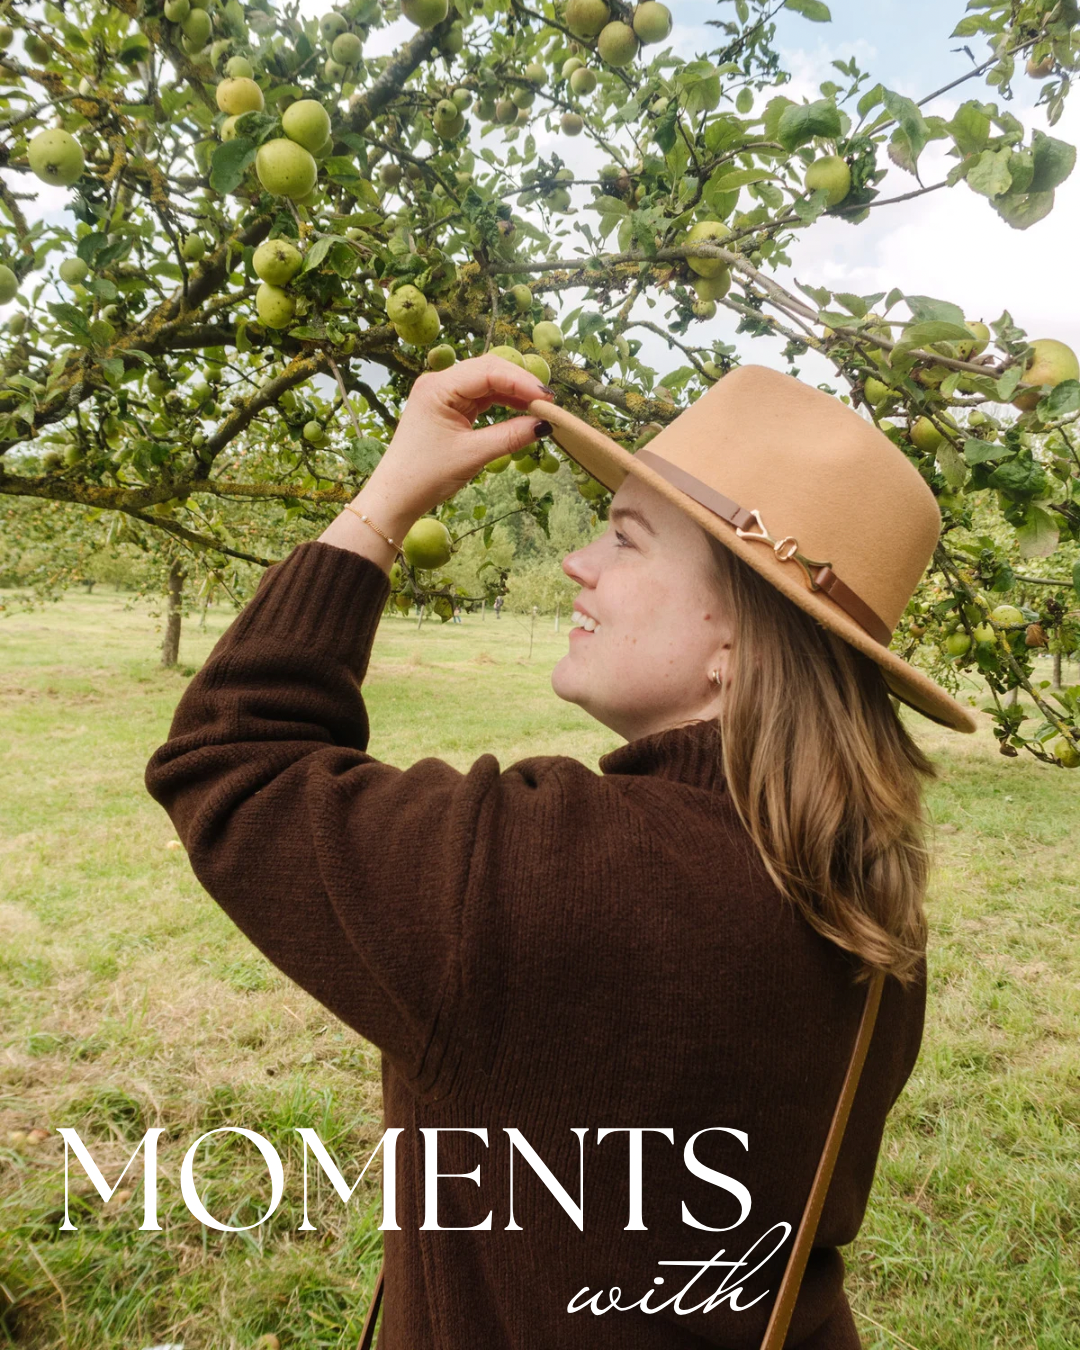 Moments with: Ellenor